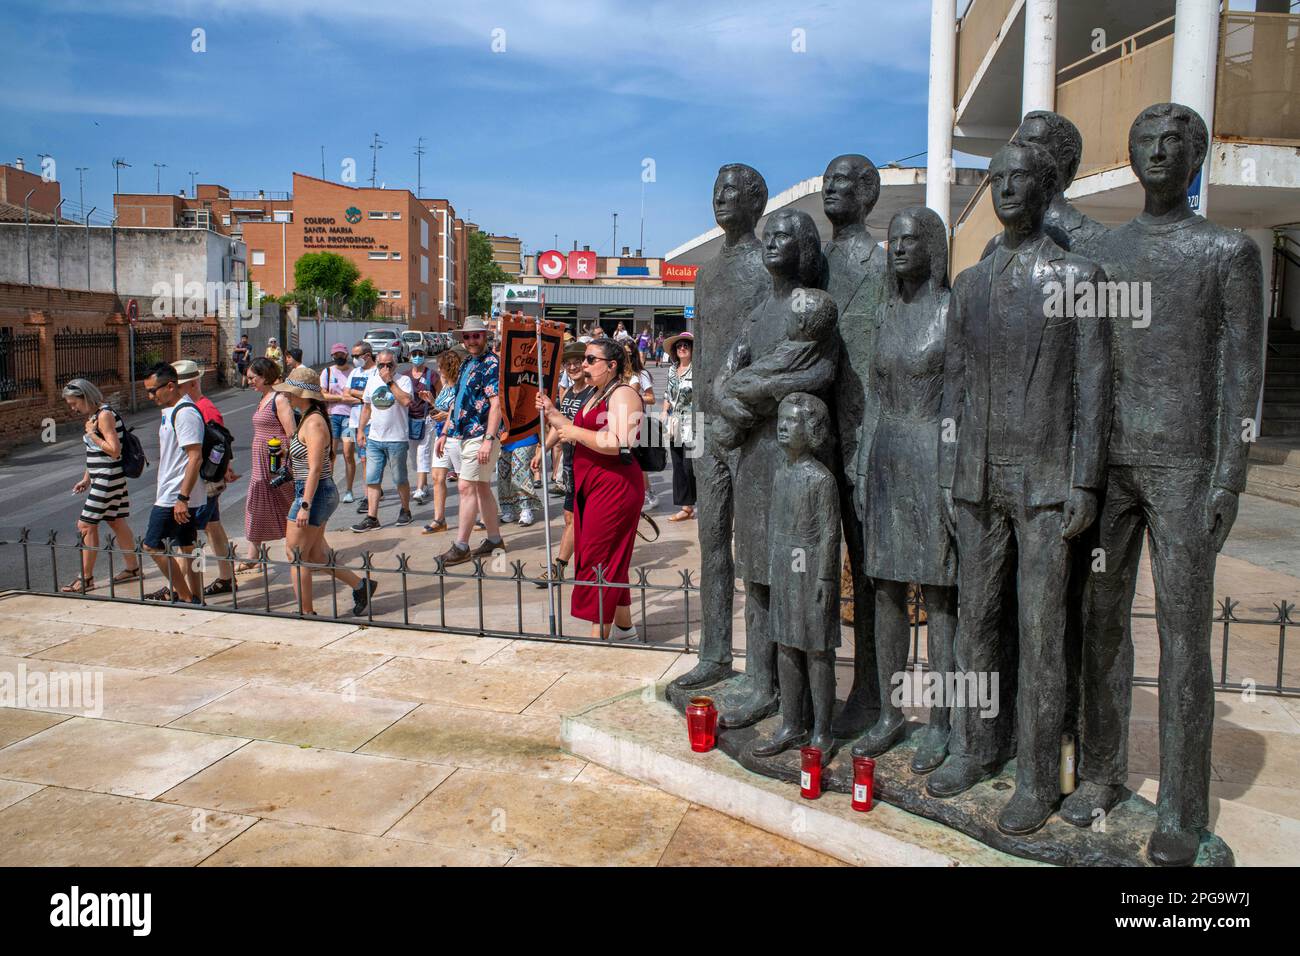 Tribute memorial in the new square March 11 in Alcala de Henares with the monument to the deceased, victims of 11-M, Madrid, Spain, Europe Stock Photo